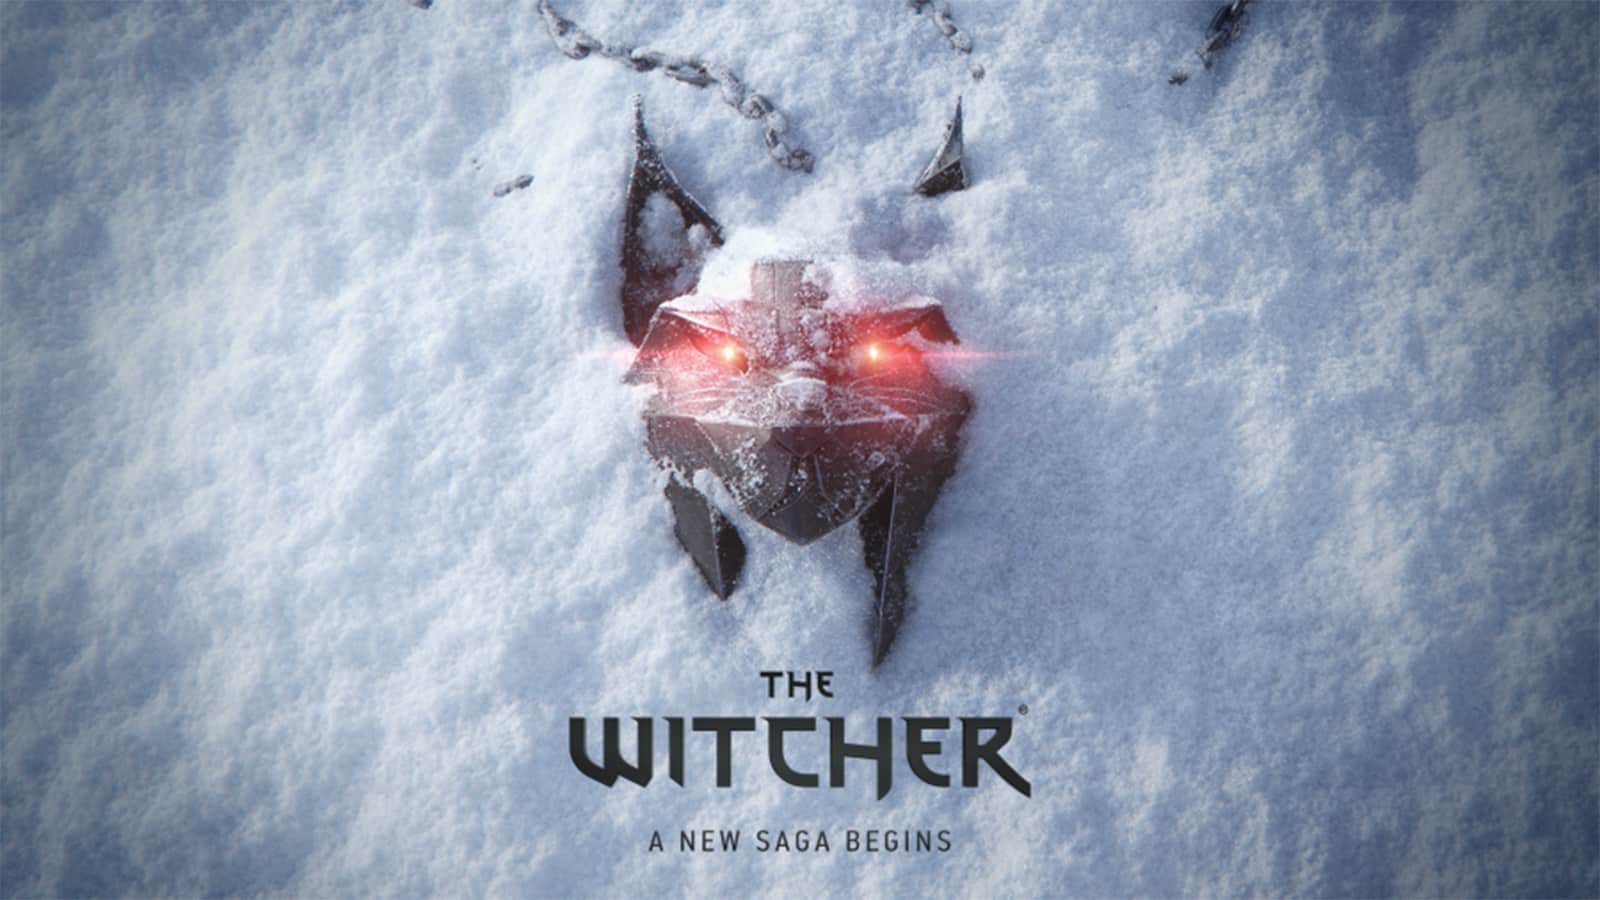 CD Projekt Red shows off The Witcher 3's 'next-gen update' ahead of launch